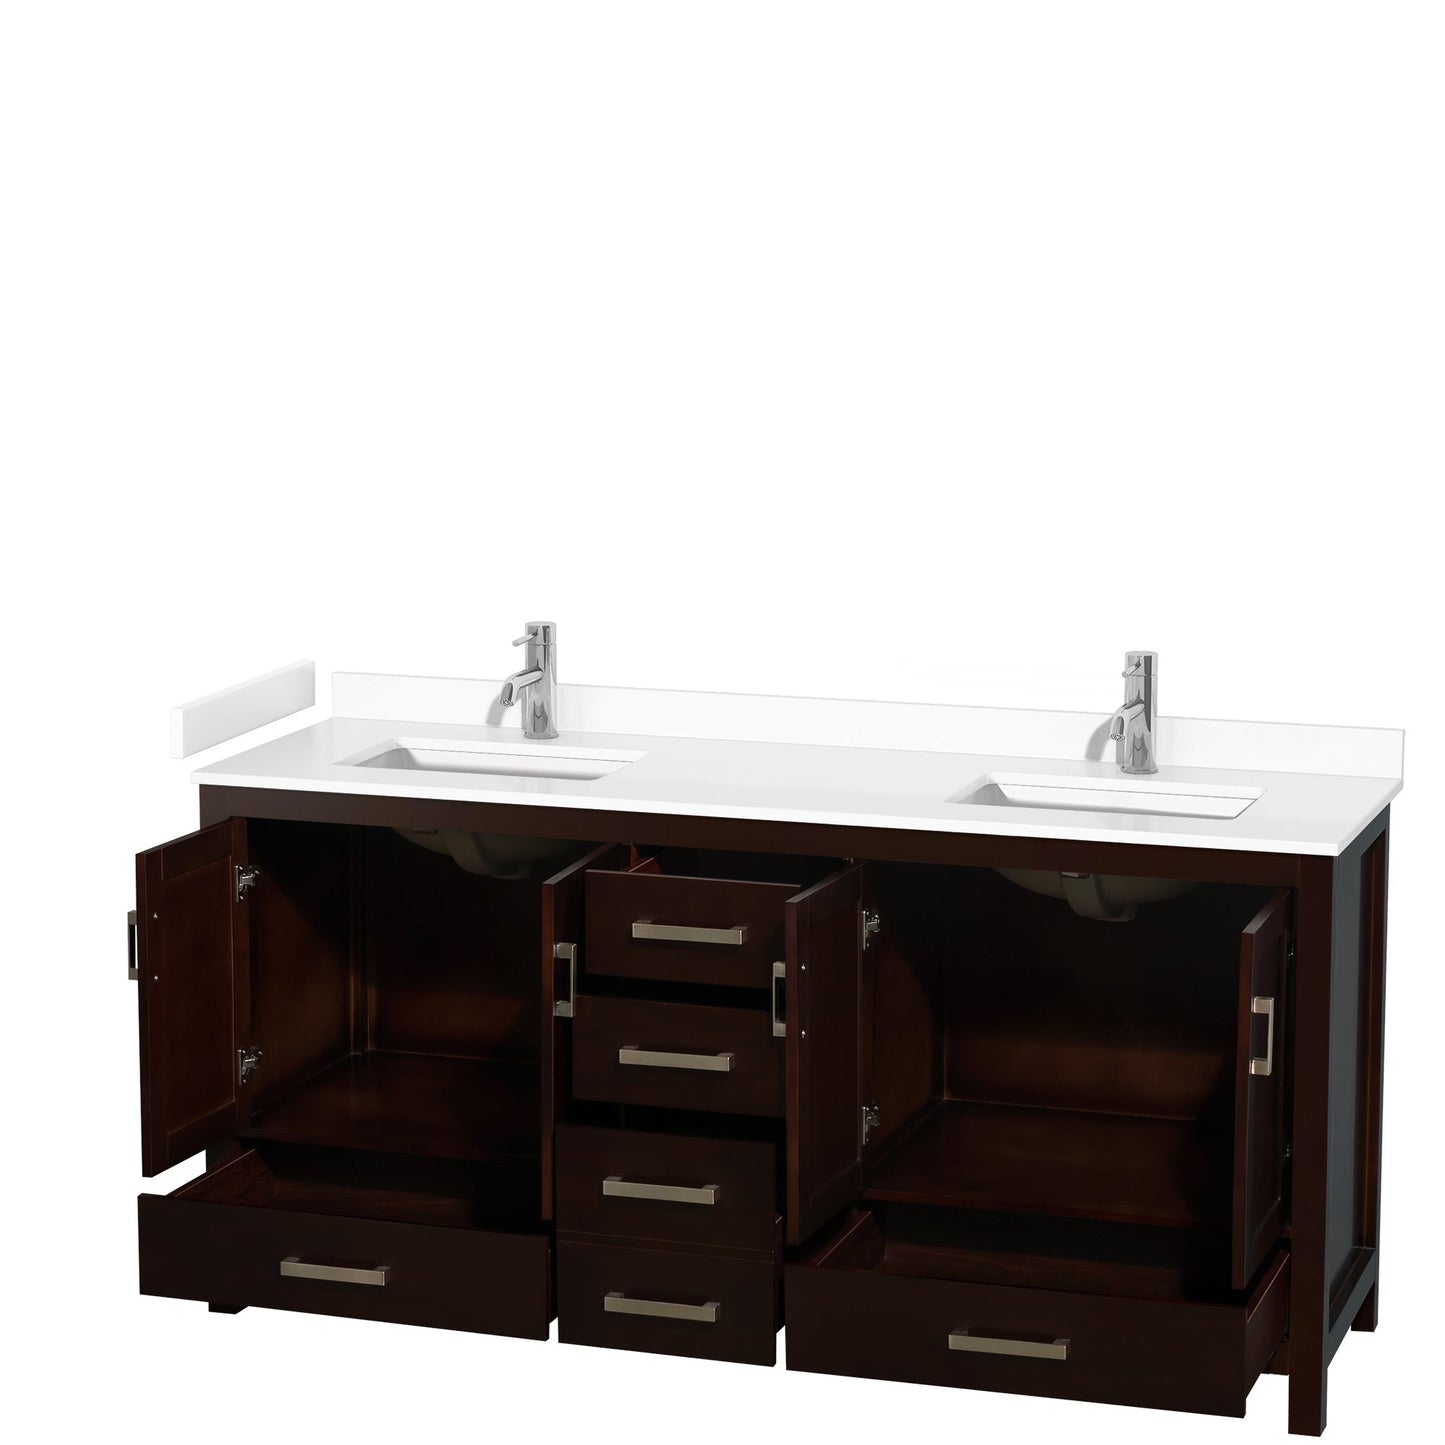 Wyndham Collection Sheffield 72" Double Bathroom Vanity in Espresso, White Cultured Marble Countertop, Undermount Square Sinks, No Mirror